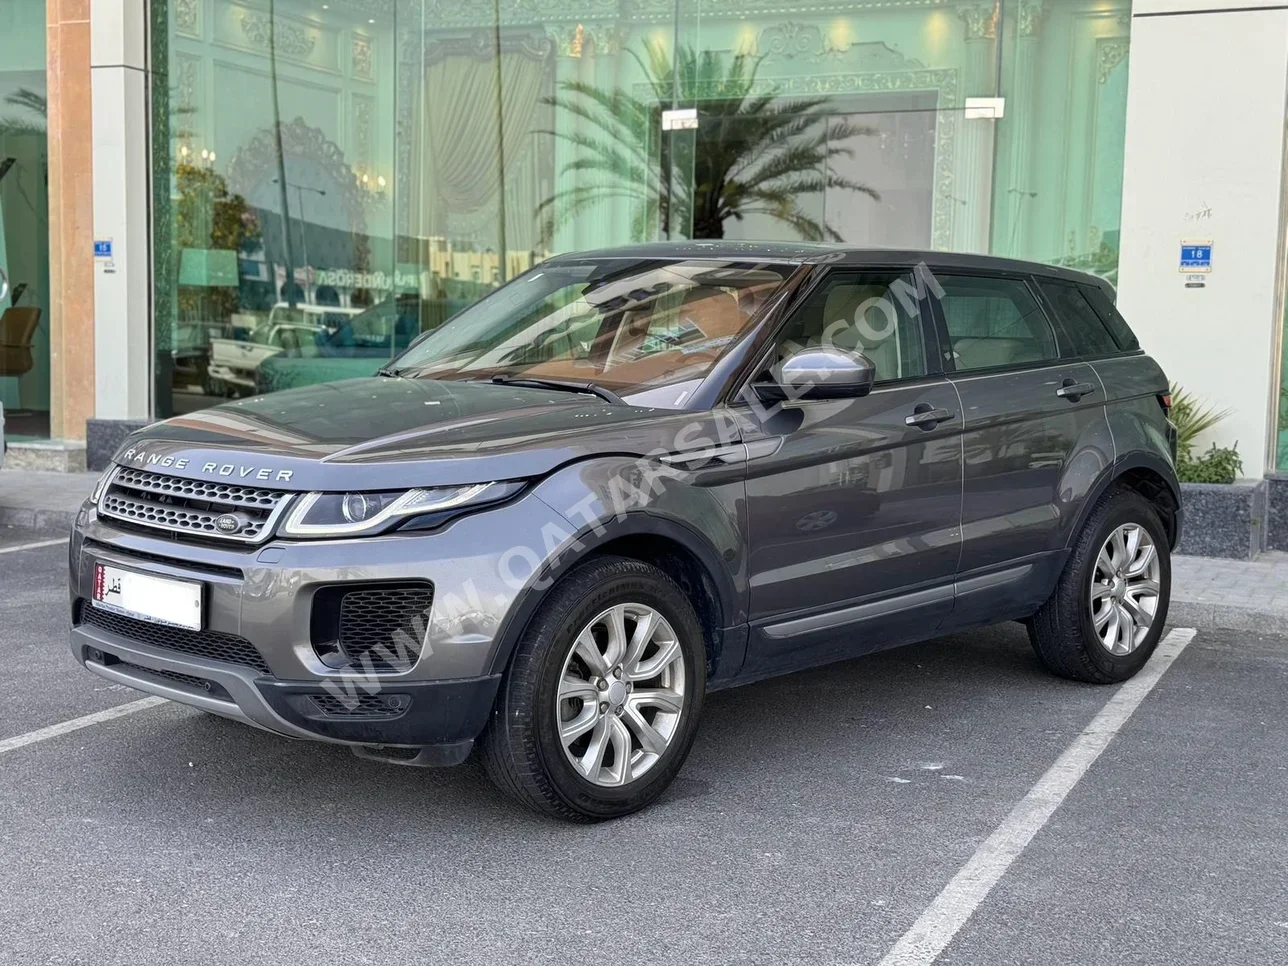  Land Rover  Evoque  2018  Automatic  130,000 Km  6 Cylinder  Four Wheel Drive (4WD)  SUV  Gray  With Warranty